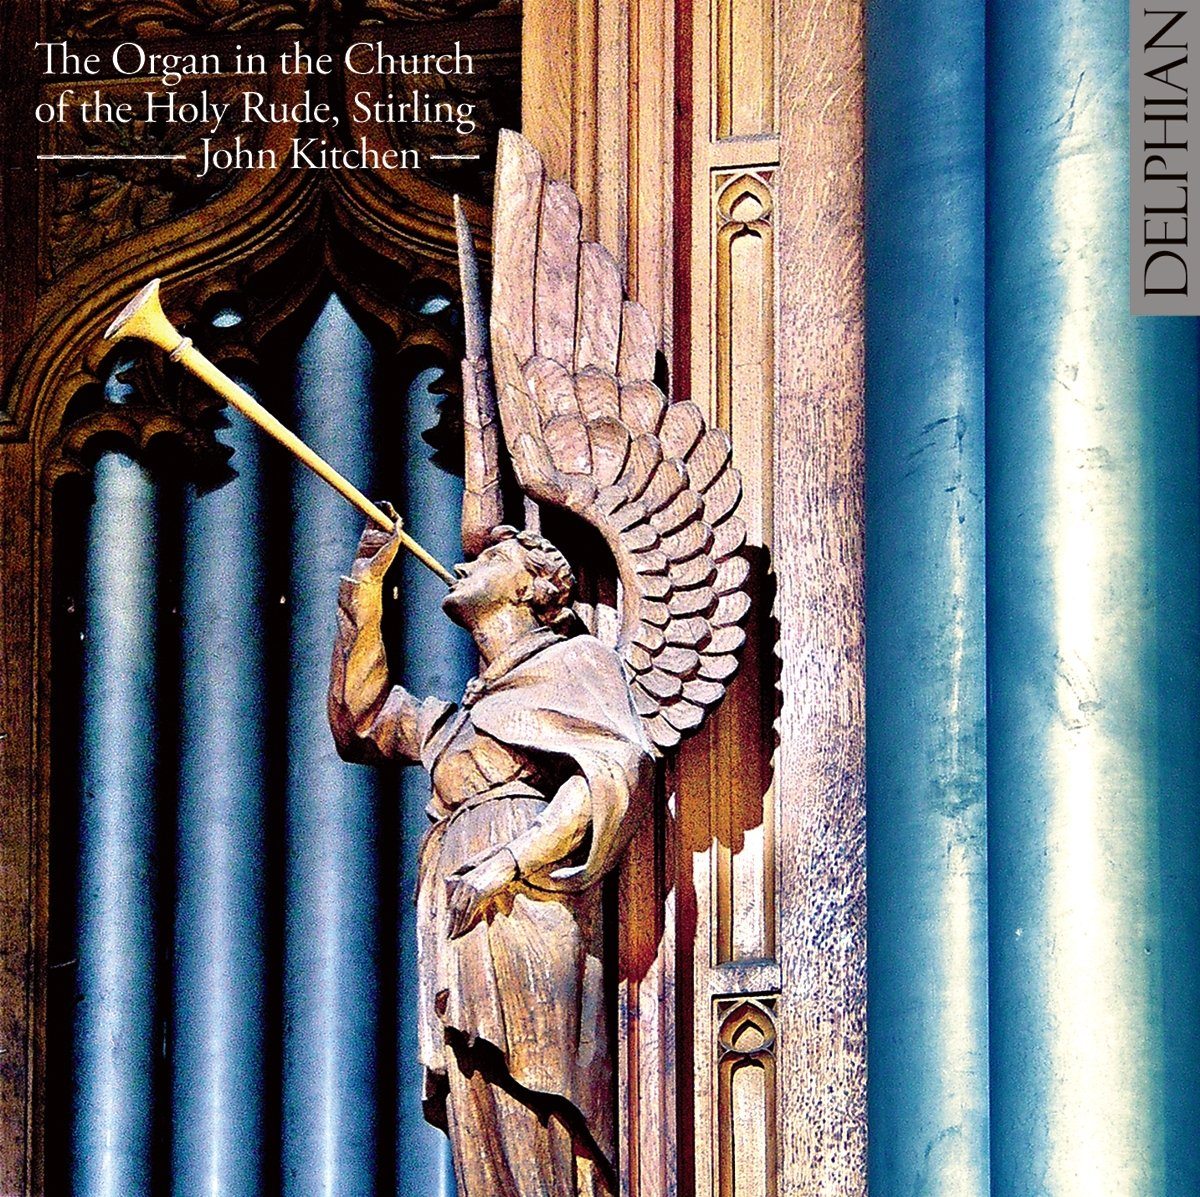 The Organ in the Church of the Holy Rude, Stirling CD Delphian Records